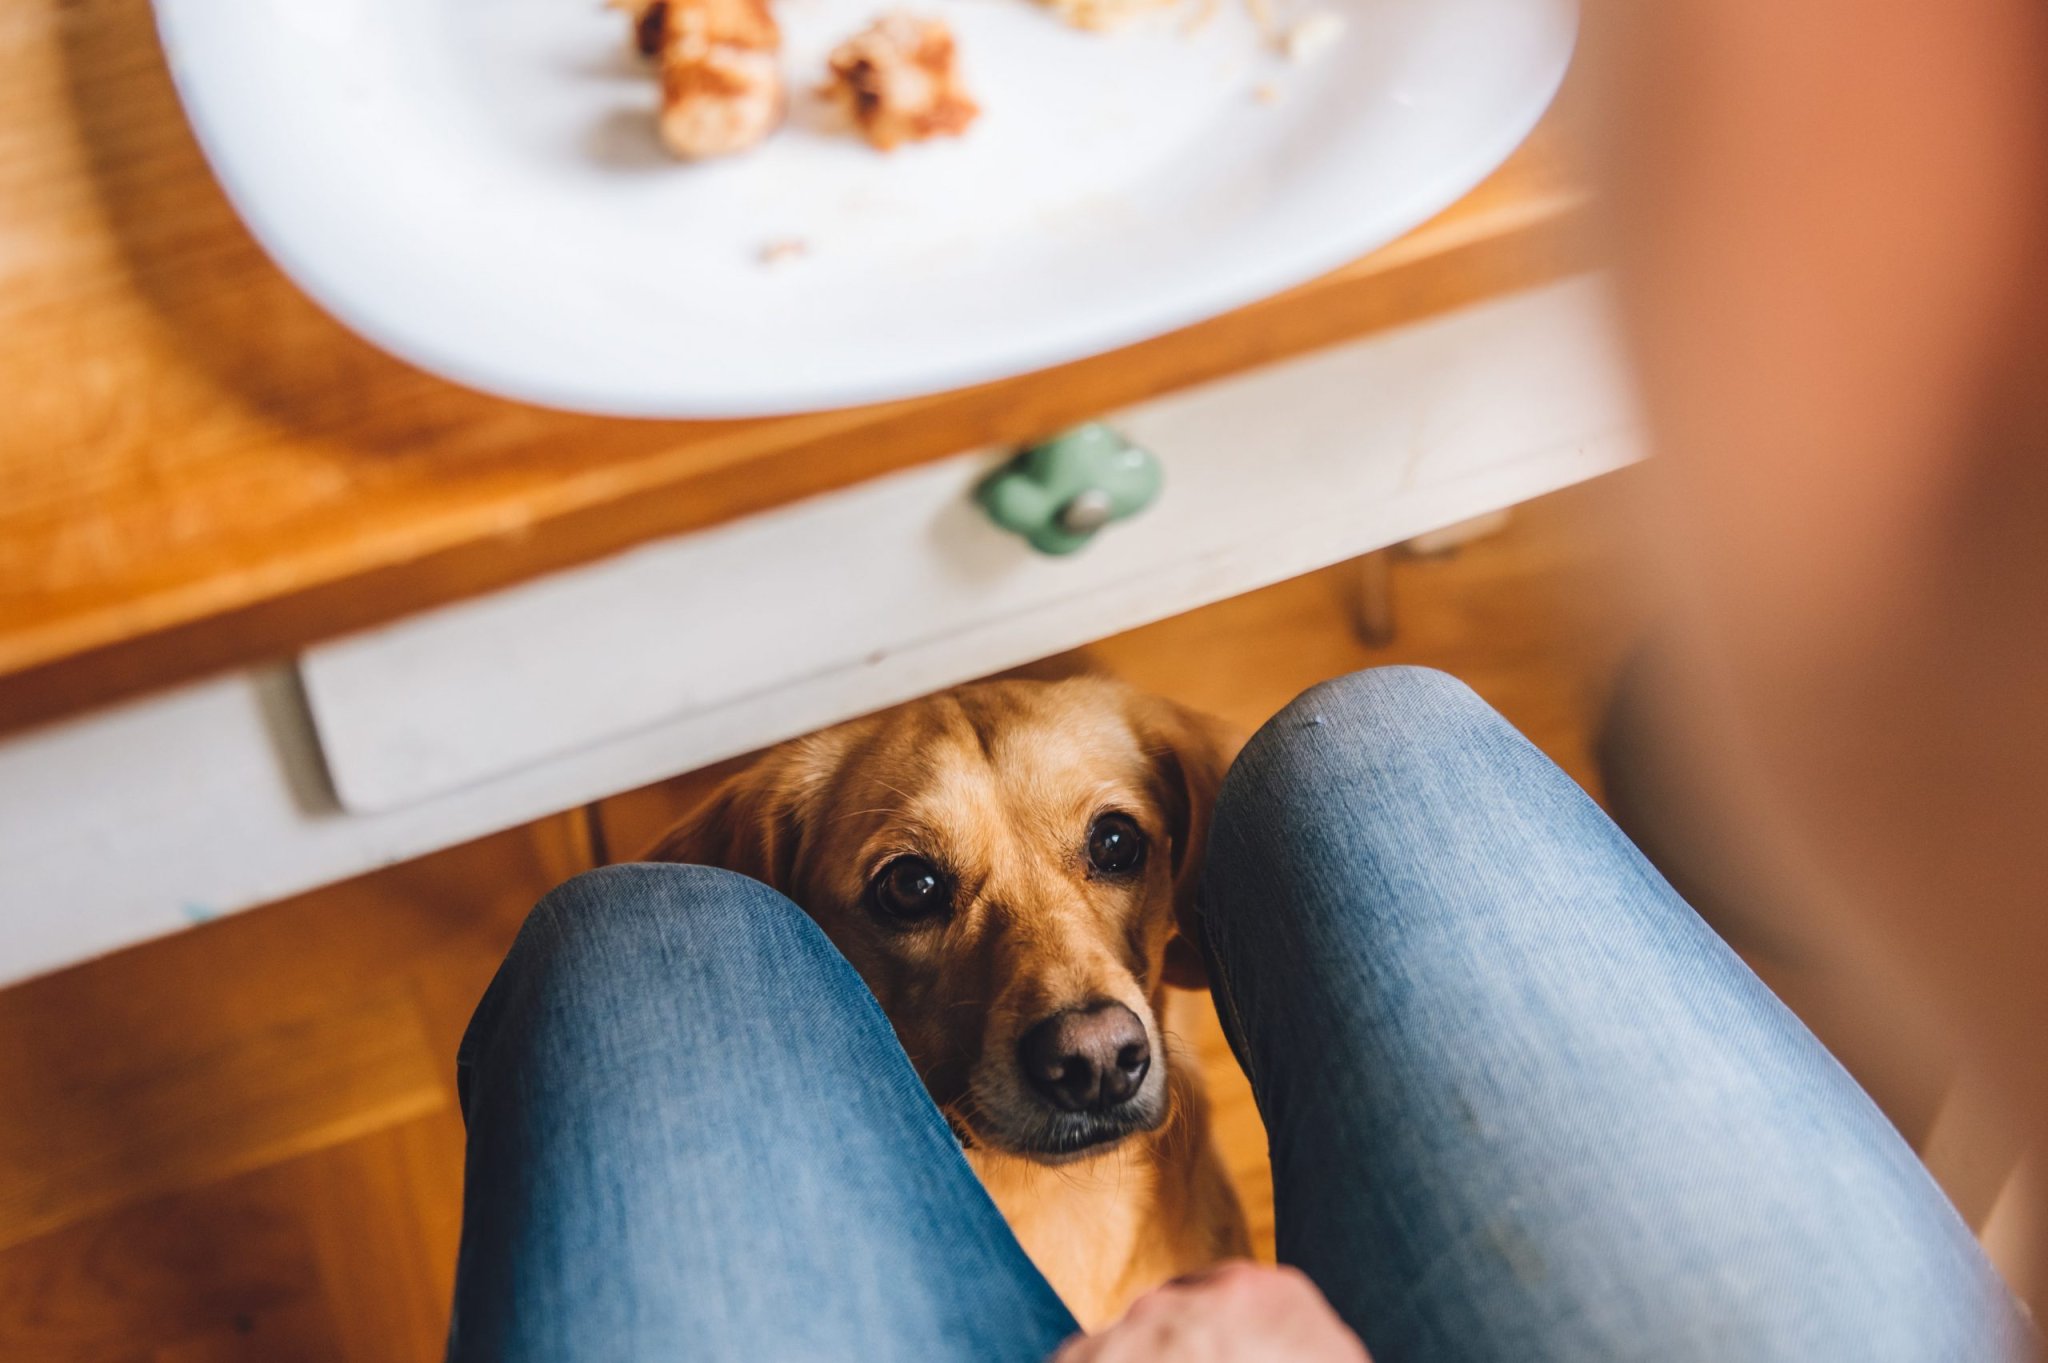 Why Does My Dog Stare at Me? Here Are the Reasons Behind All That Eye Contact